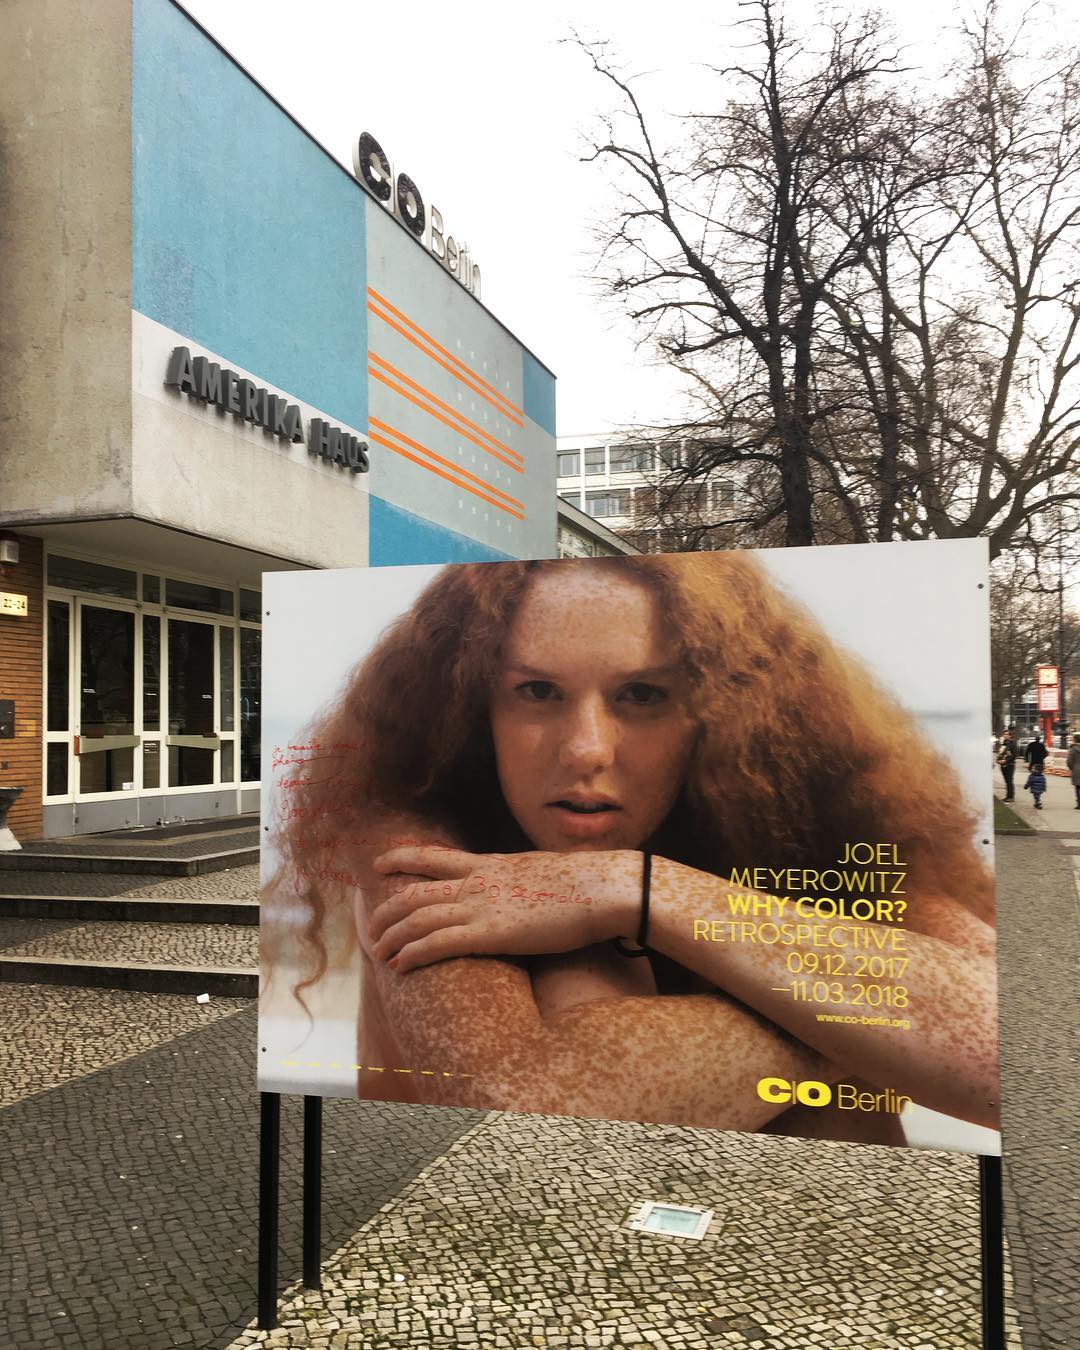 C/O Berlin today. Great to see the Joel Mayerowitz retrospektive WhyColor? today. Go see it if you can @coberlin #photography #coberlin #americahaus #exhibition #retrospective #joelmayerowitz #bailgun